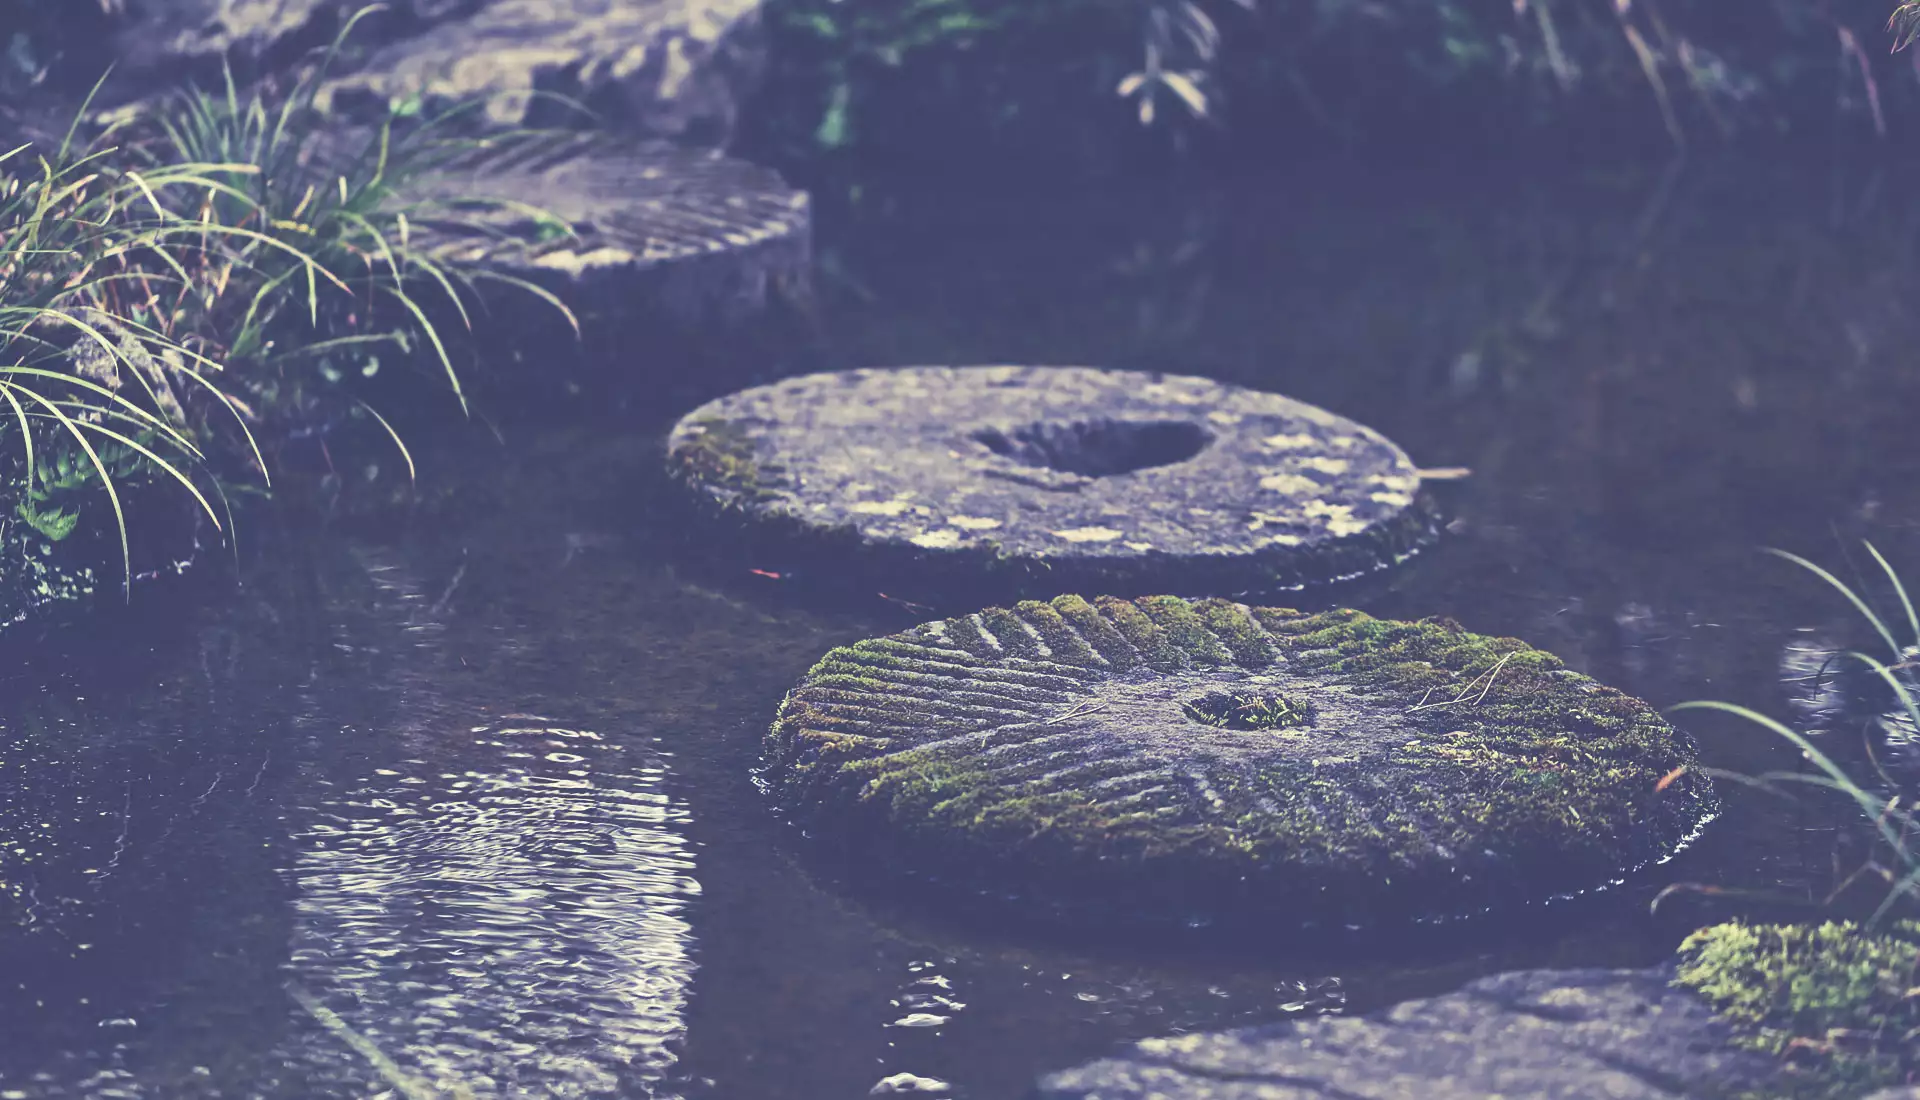 round stone stepping stones across calm water